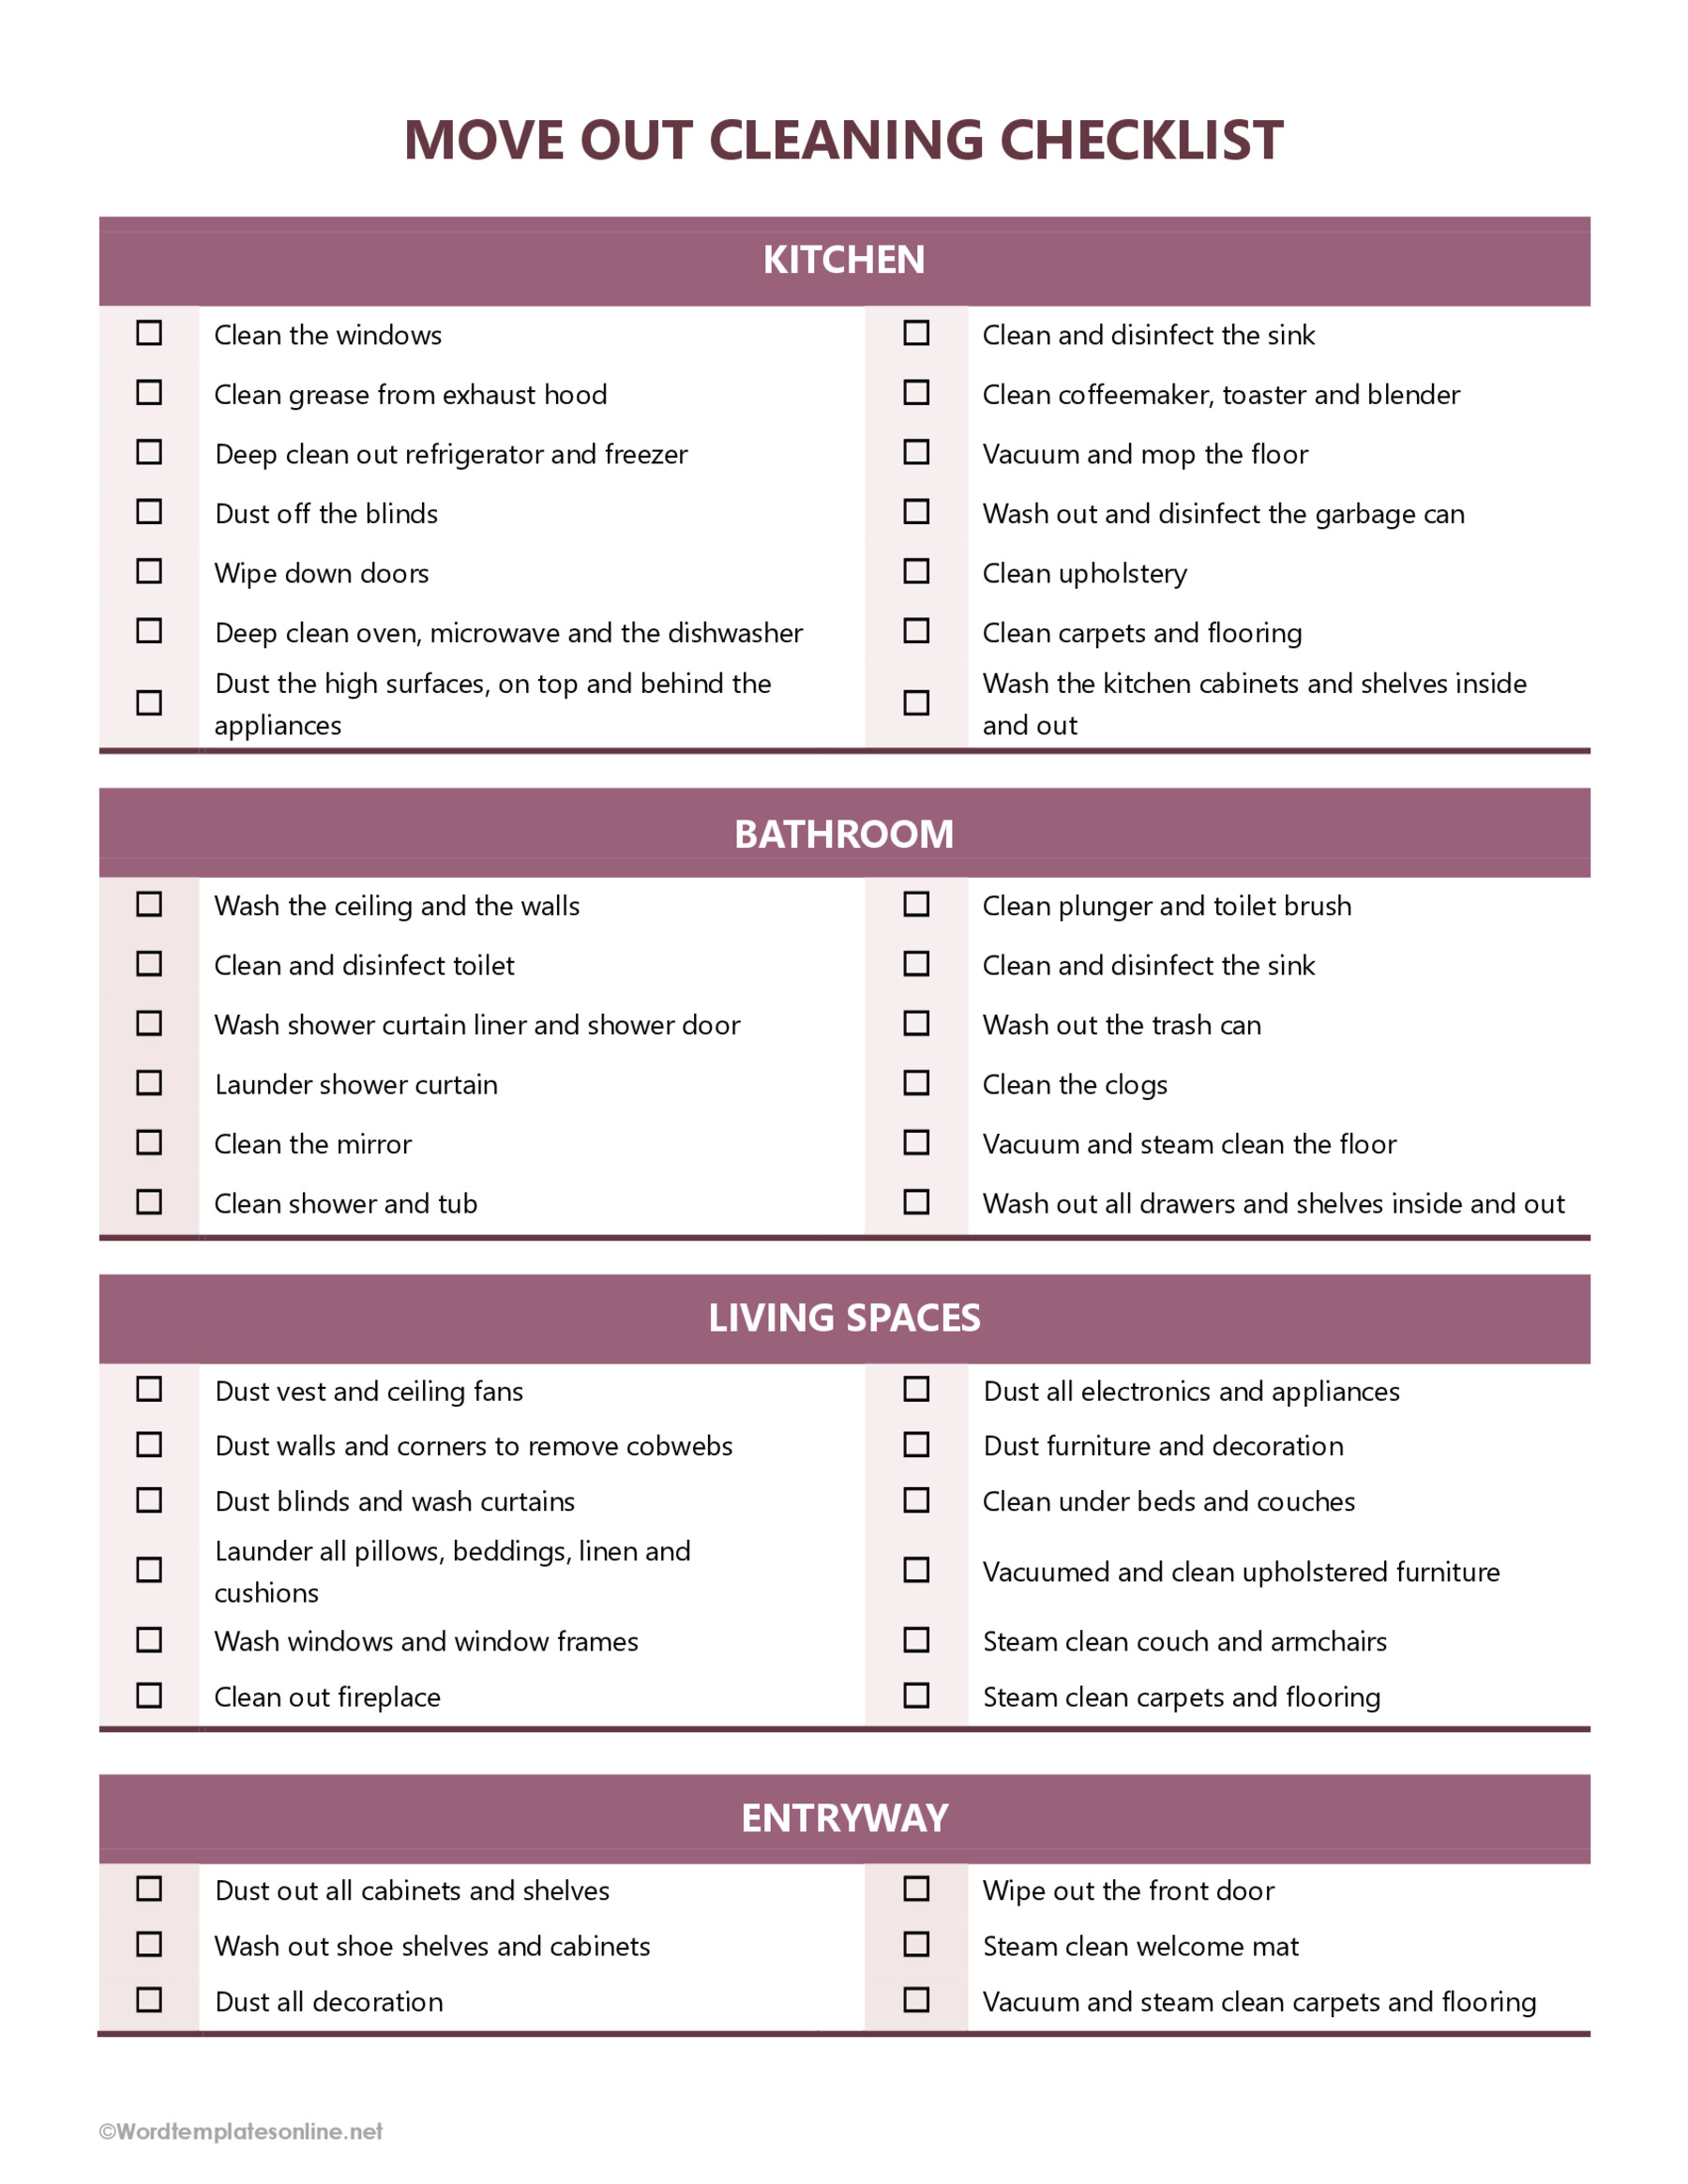 Move Out Cleaning Checklist Template for Free